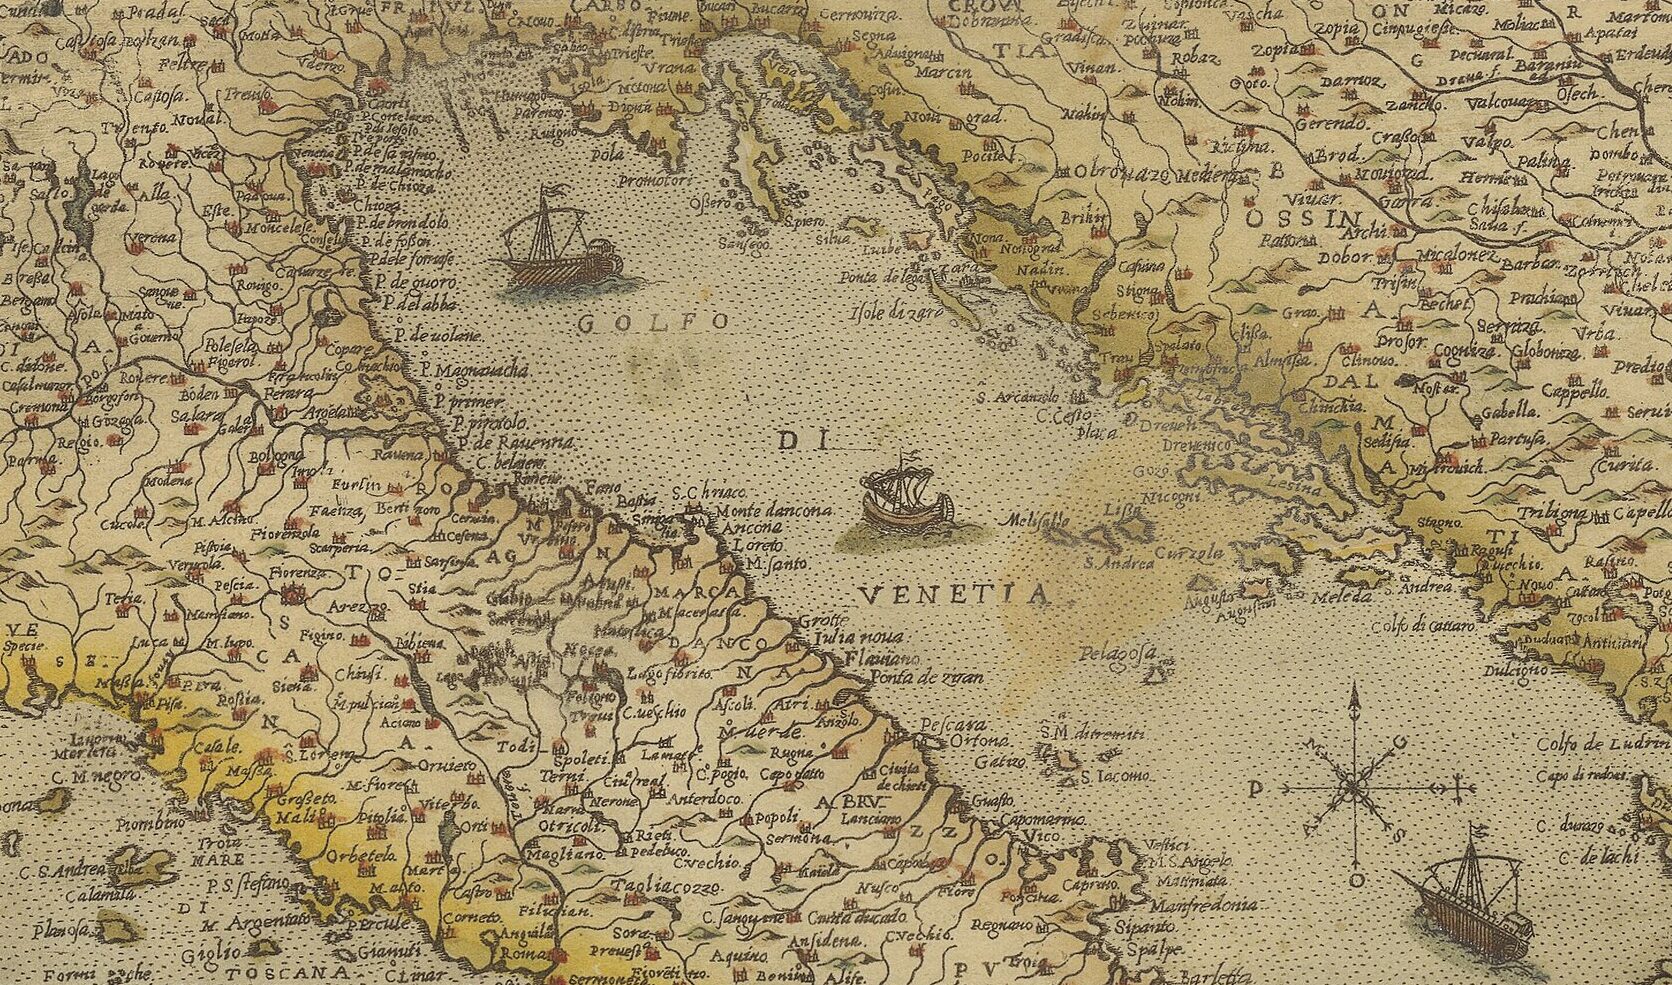 Adriatic Sea or Gulf of Venice? How Medieval Politics played out on maps